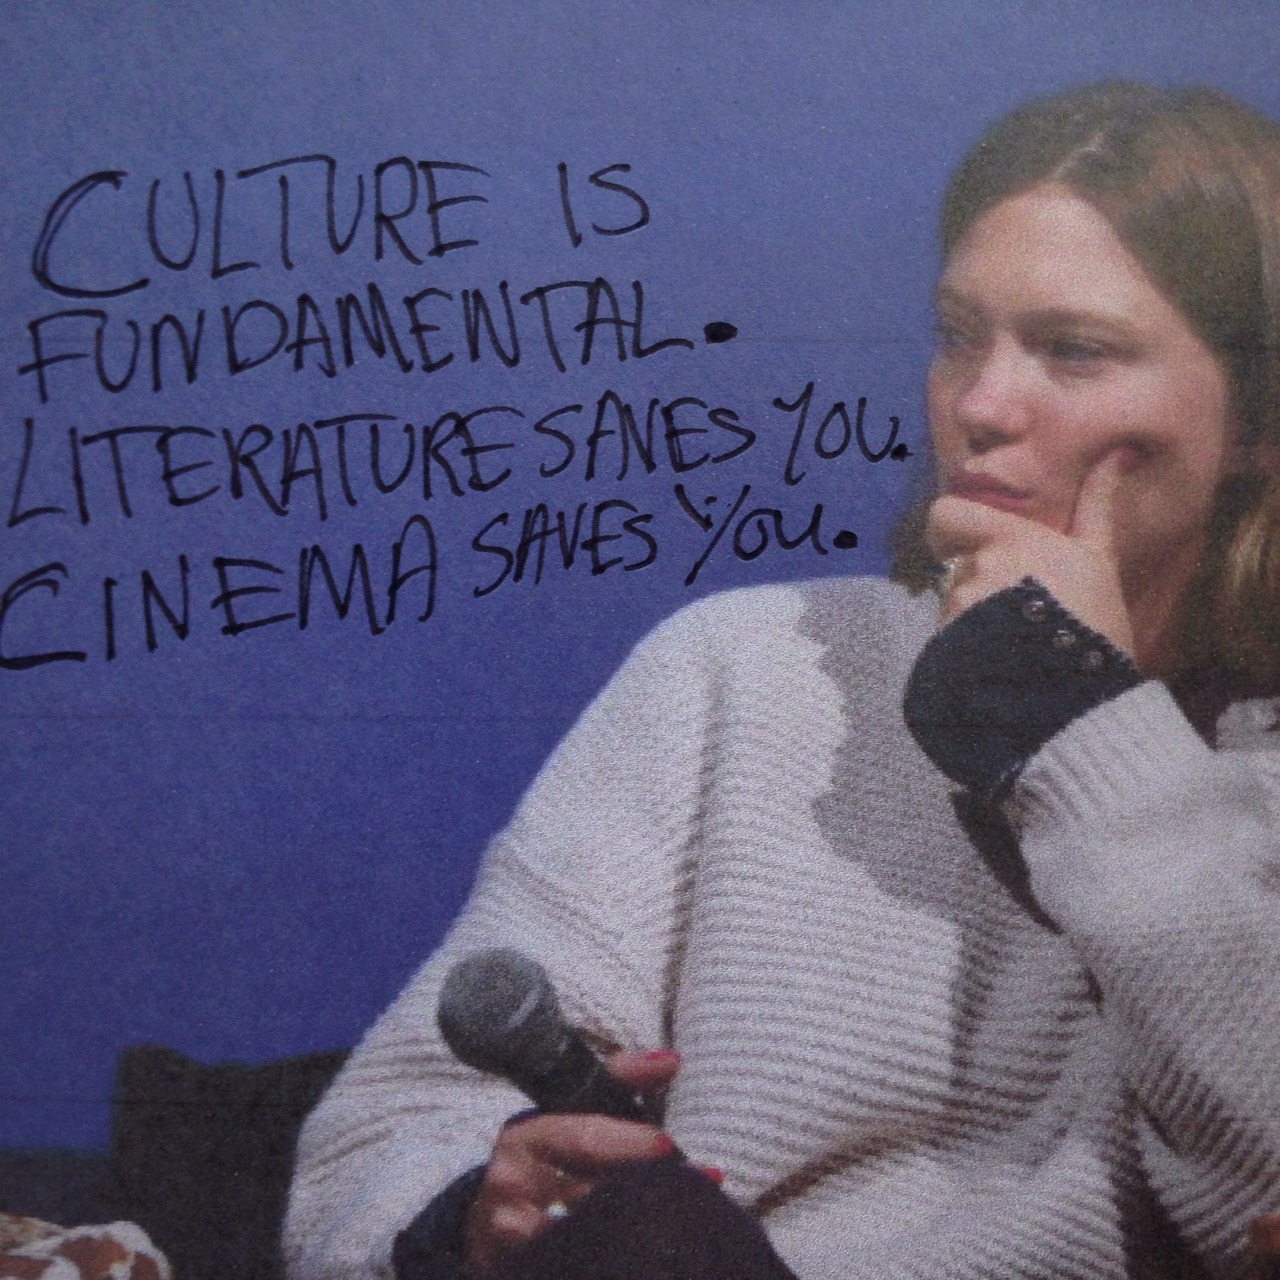 chloesevigny1974:Culture is fundamental. Literature saves you. Cinema saves you.